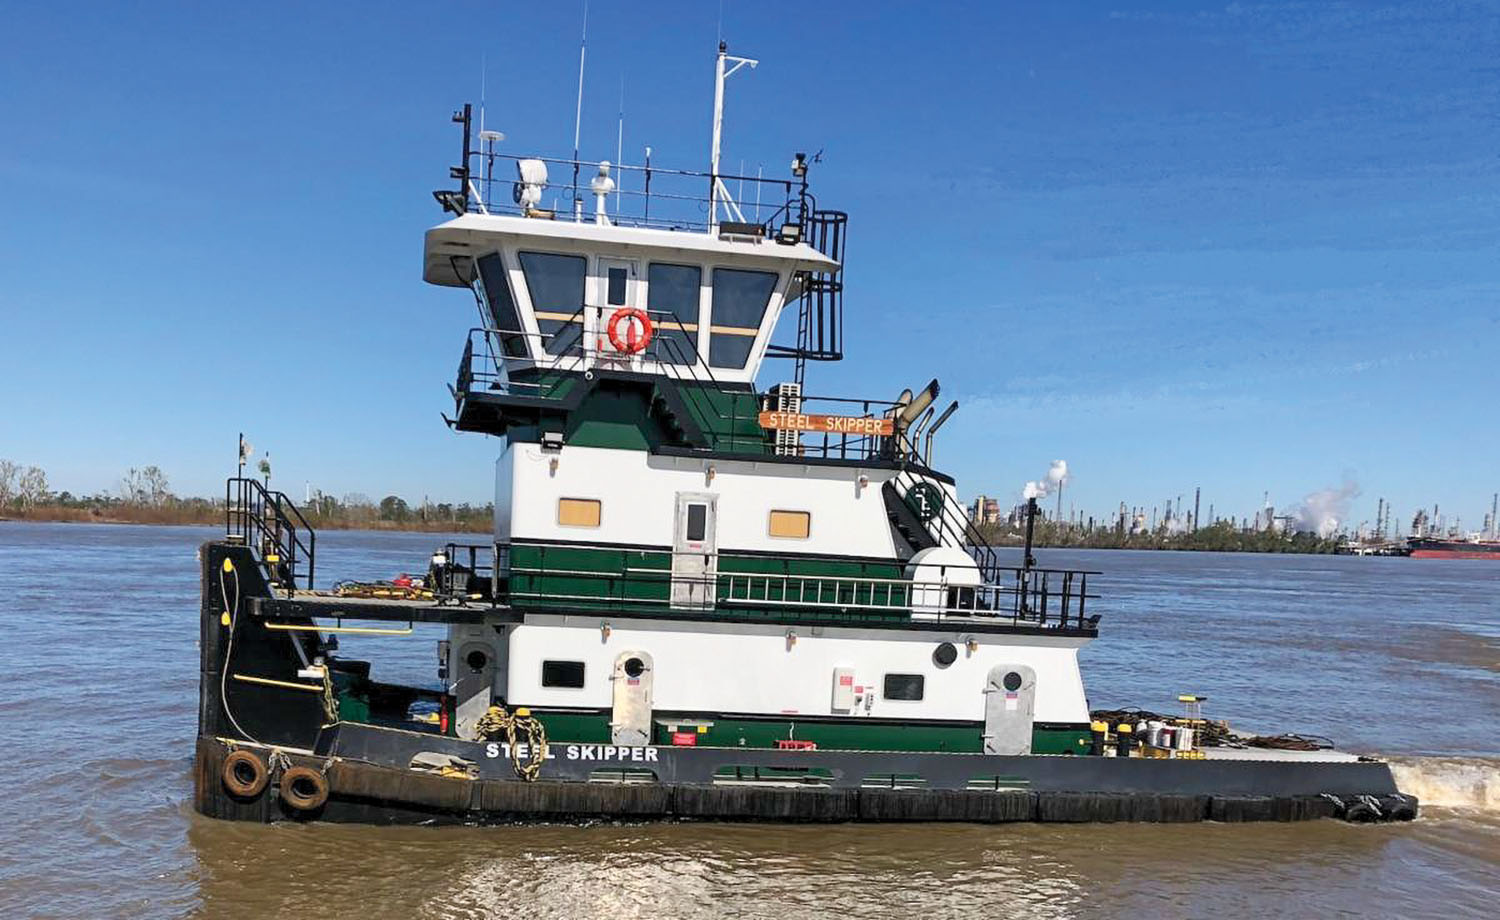 The mv. Steel Skipper is the last of four identical towboats Master Marine Inc. built for Plimsoll Marine.